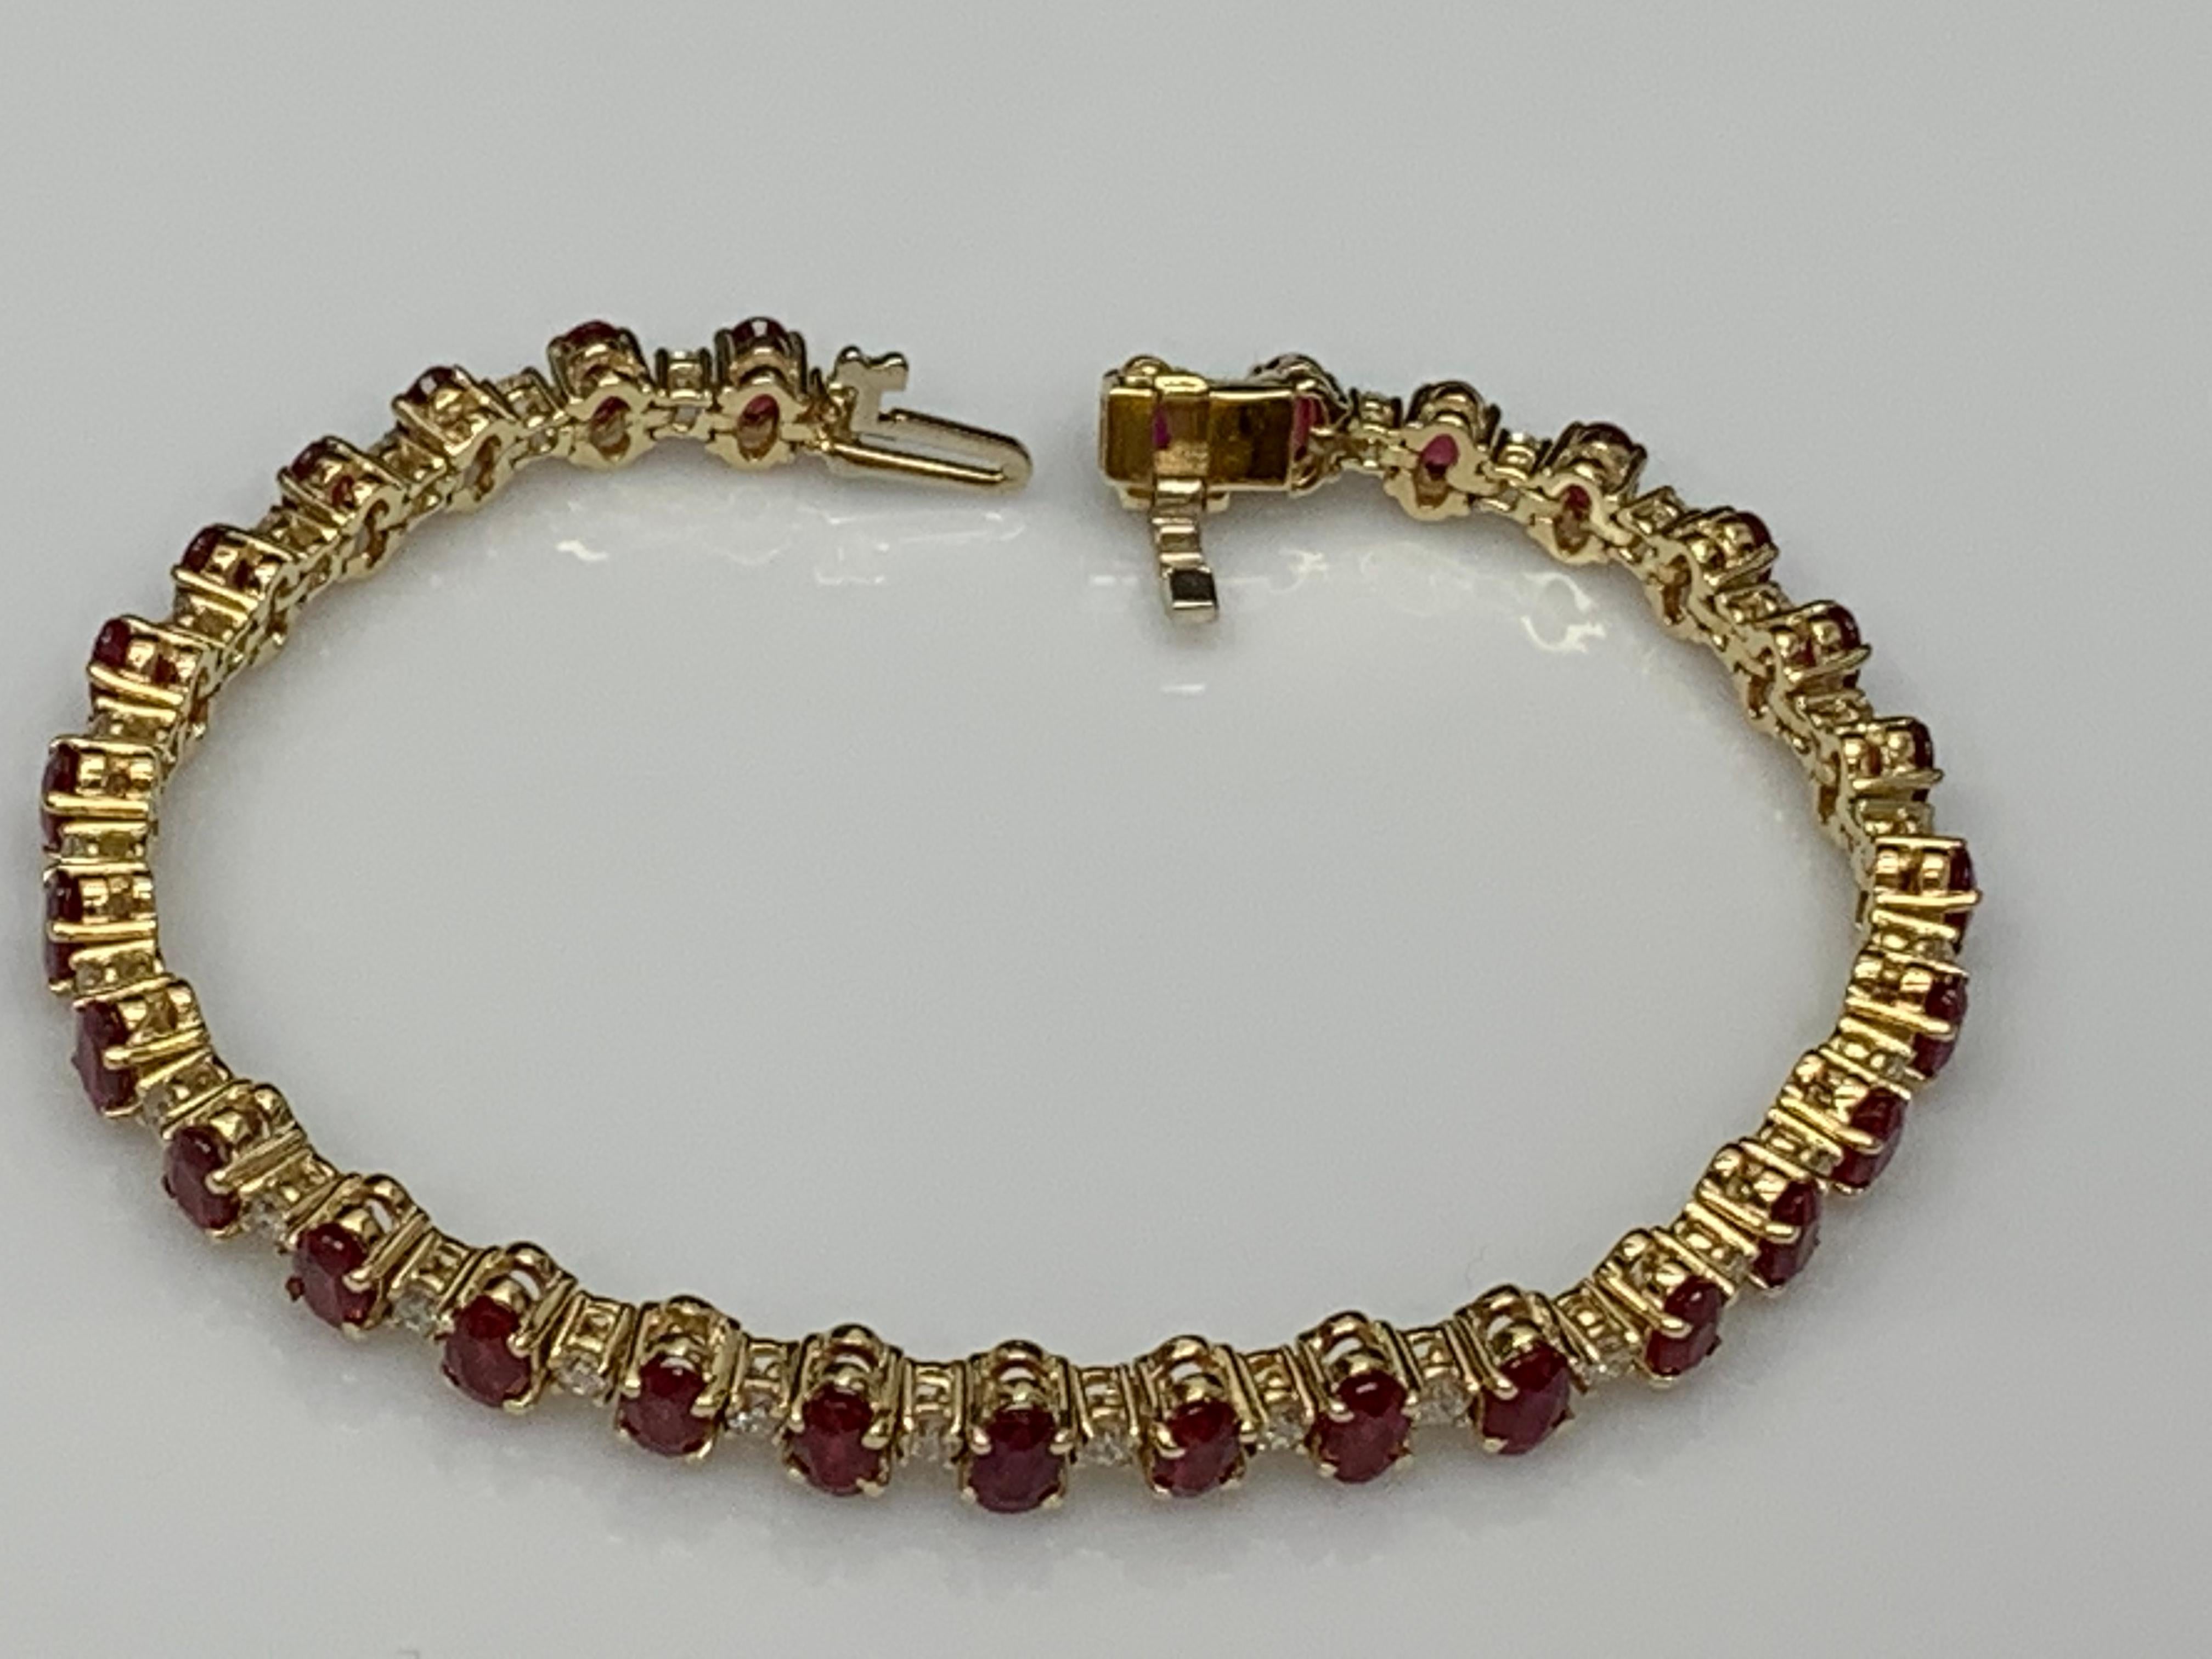 Grandeur 9.27 Carats Oval Cut Ruby and Diamond Bracelet in 14k Yellow Gold For Sale 8